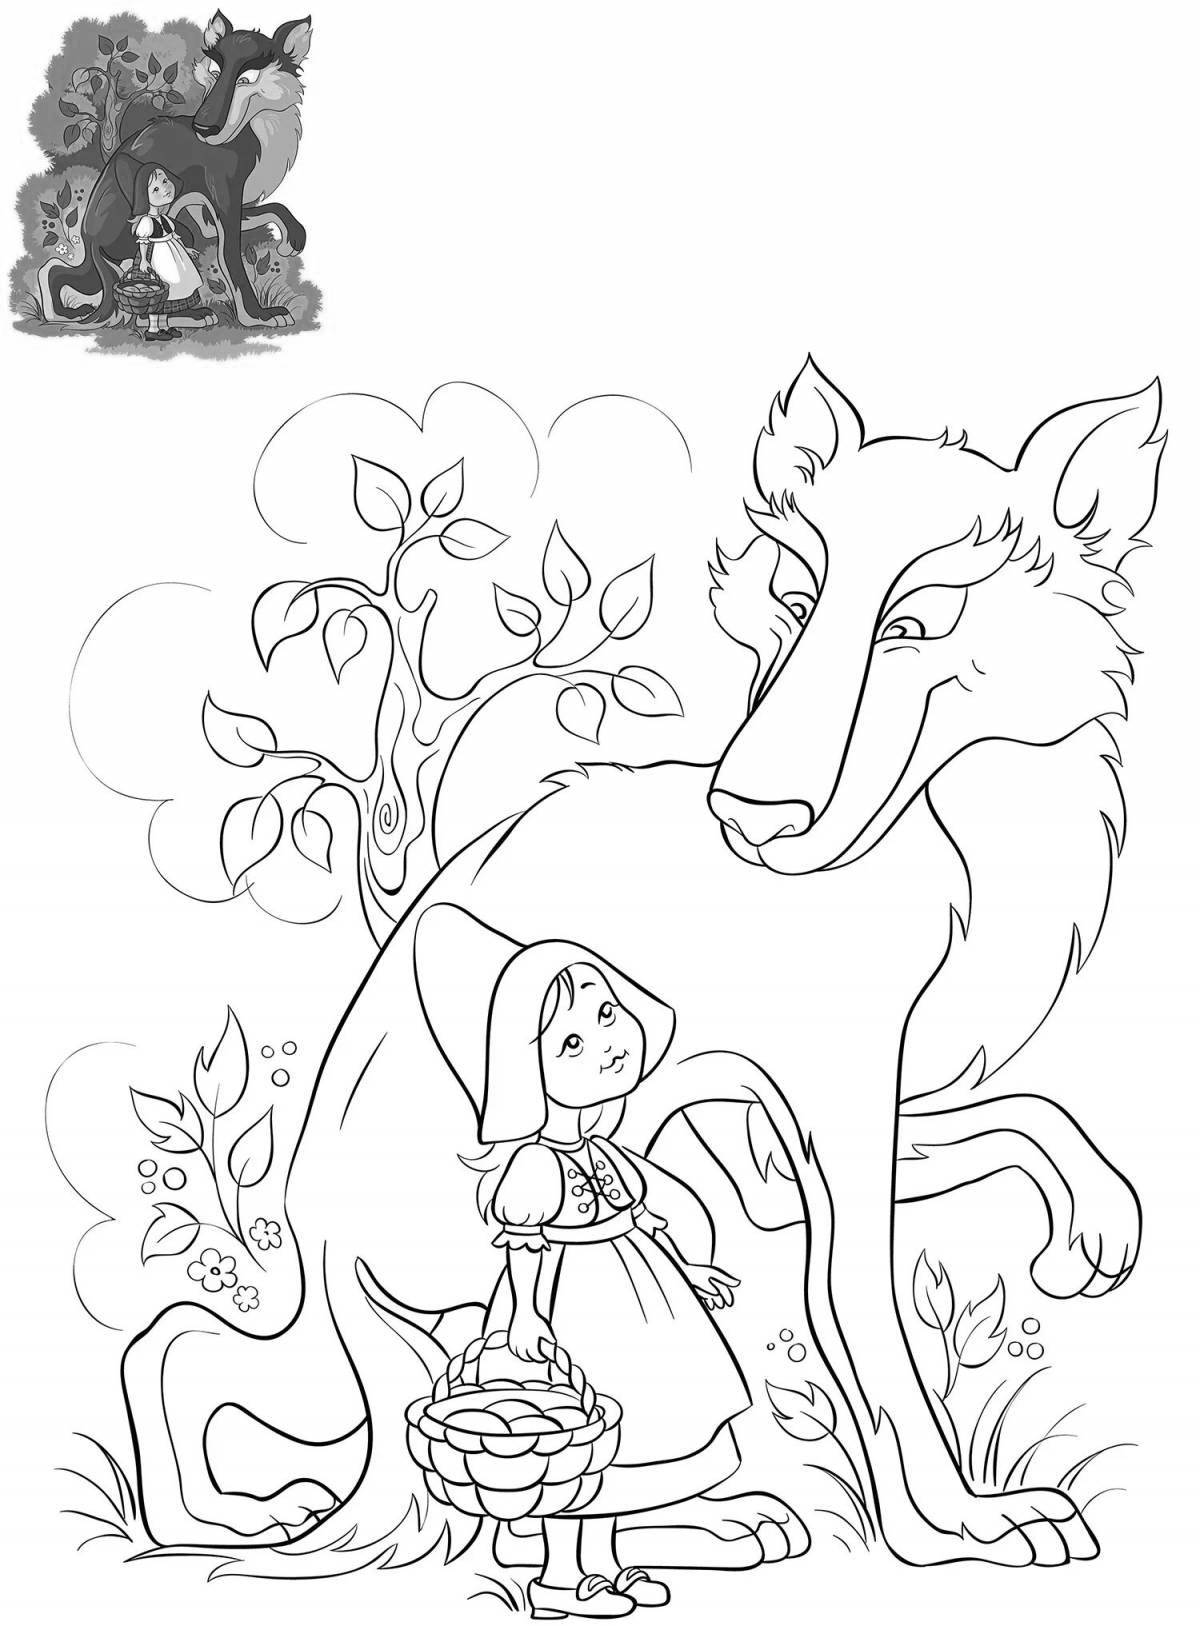 Inspirational wolf and little red riding hood coloring book